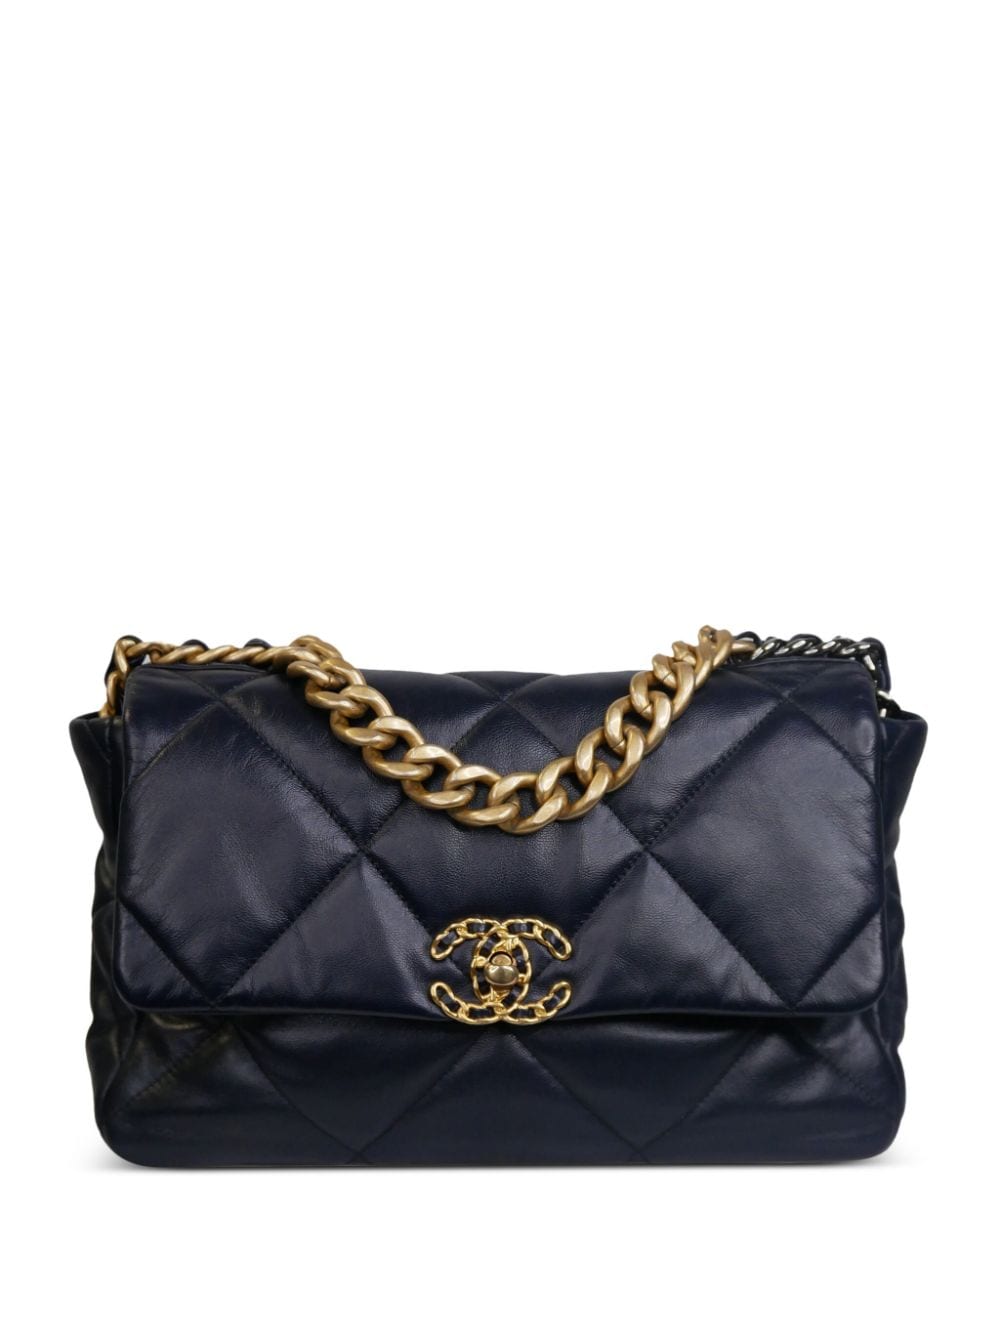 CHANEL Pre-Owned 2020 Large Padded Classic Flap Shoulder Bag